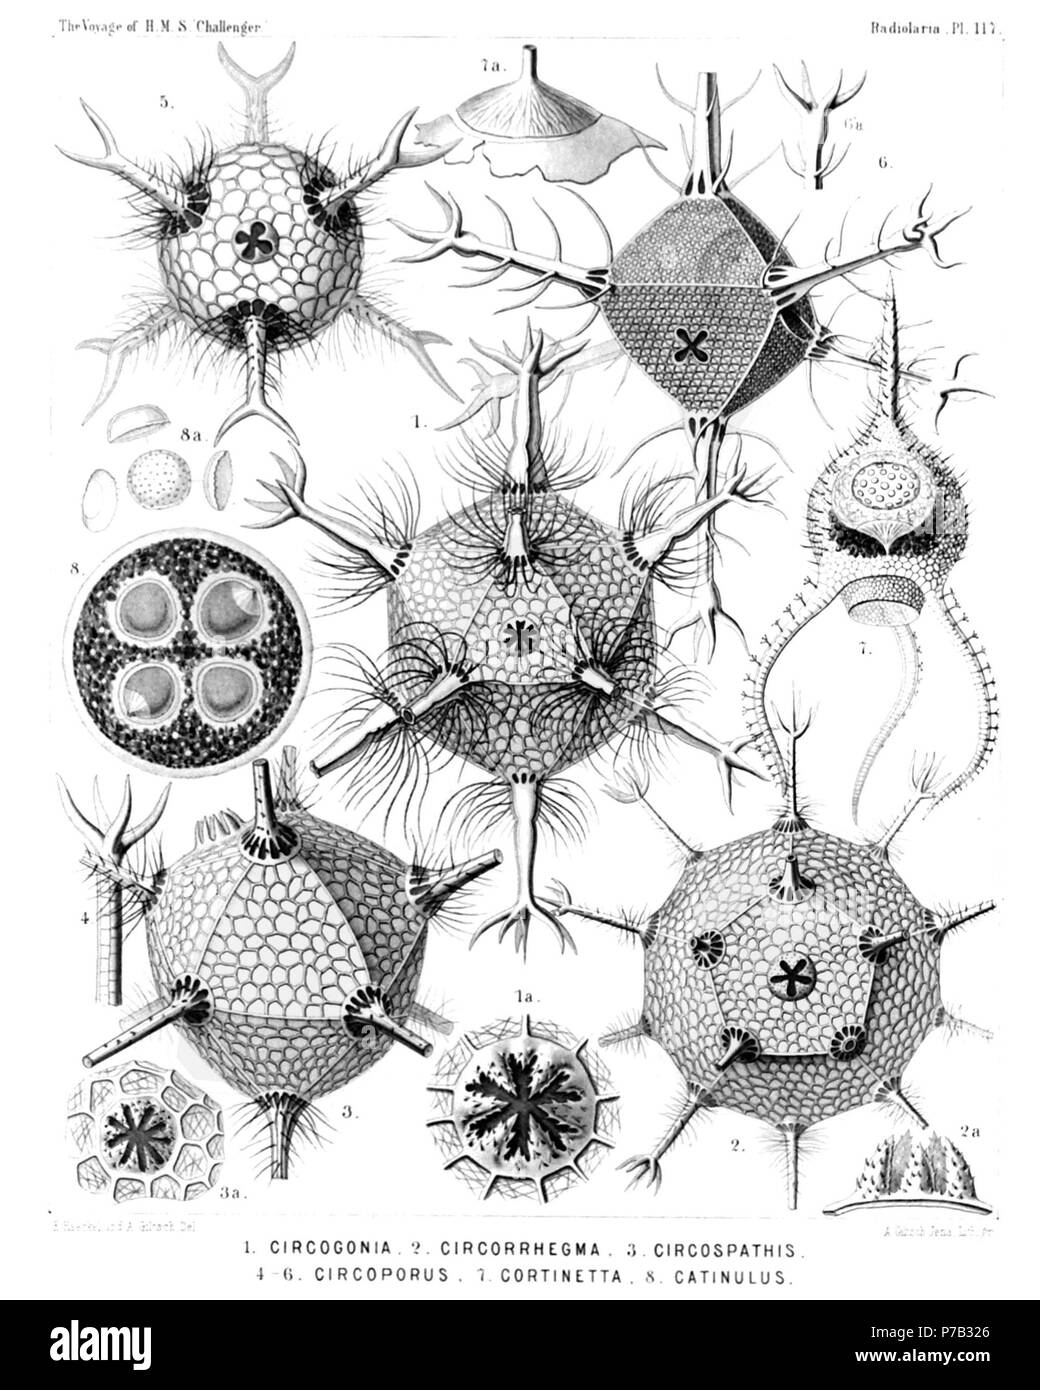 English: Illustration from Report on the Radiolaria collected by H.M.S. Challenger during the years 1873-1876. Part III. Original description follows:  Plate 117. Cannorrhaphida, Medusettida et Circoporida.  Diam.  Fig. 1. Circogonia icosahedra, n. sp., × 80  The entire shell, with twelve radial tubes and twenty triangular faces. In the centre of one face is the mouth, with six teeth.  Fig. 1a. The mouth alone, with its six spinulate teeth, × 400  Fig. 2. Circorrhegma dodecahedra, n. sp., × 80  The entire shell, with twenty radial tubes and twelve pentagonal faces. In the centre of one face is Stock Photo